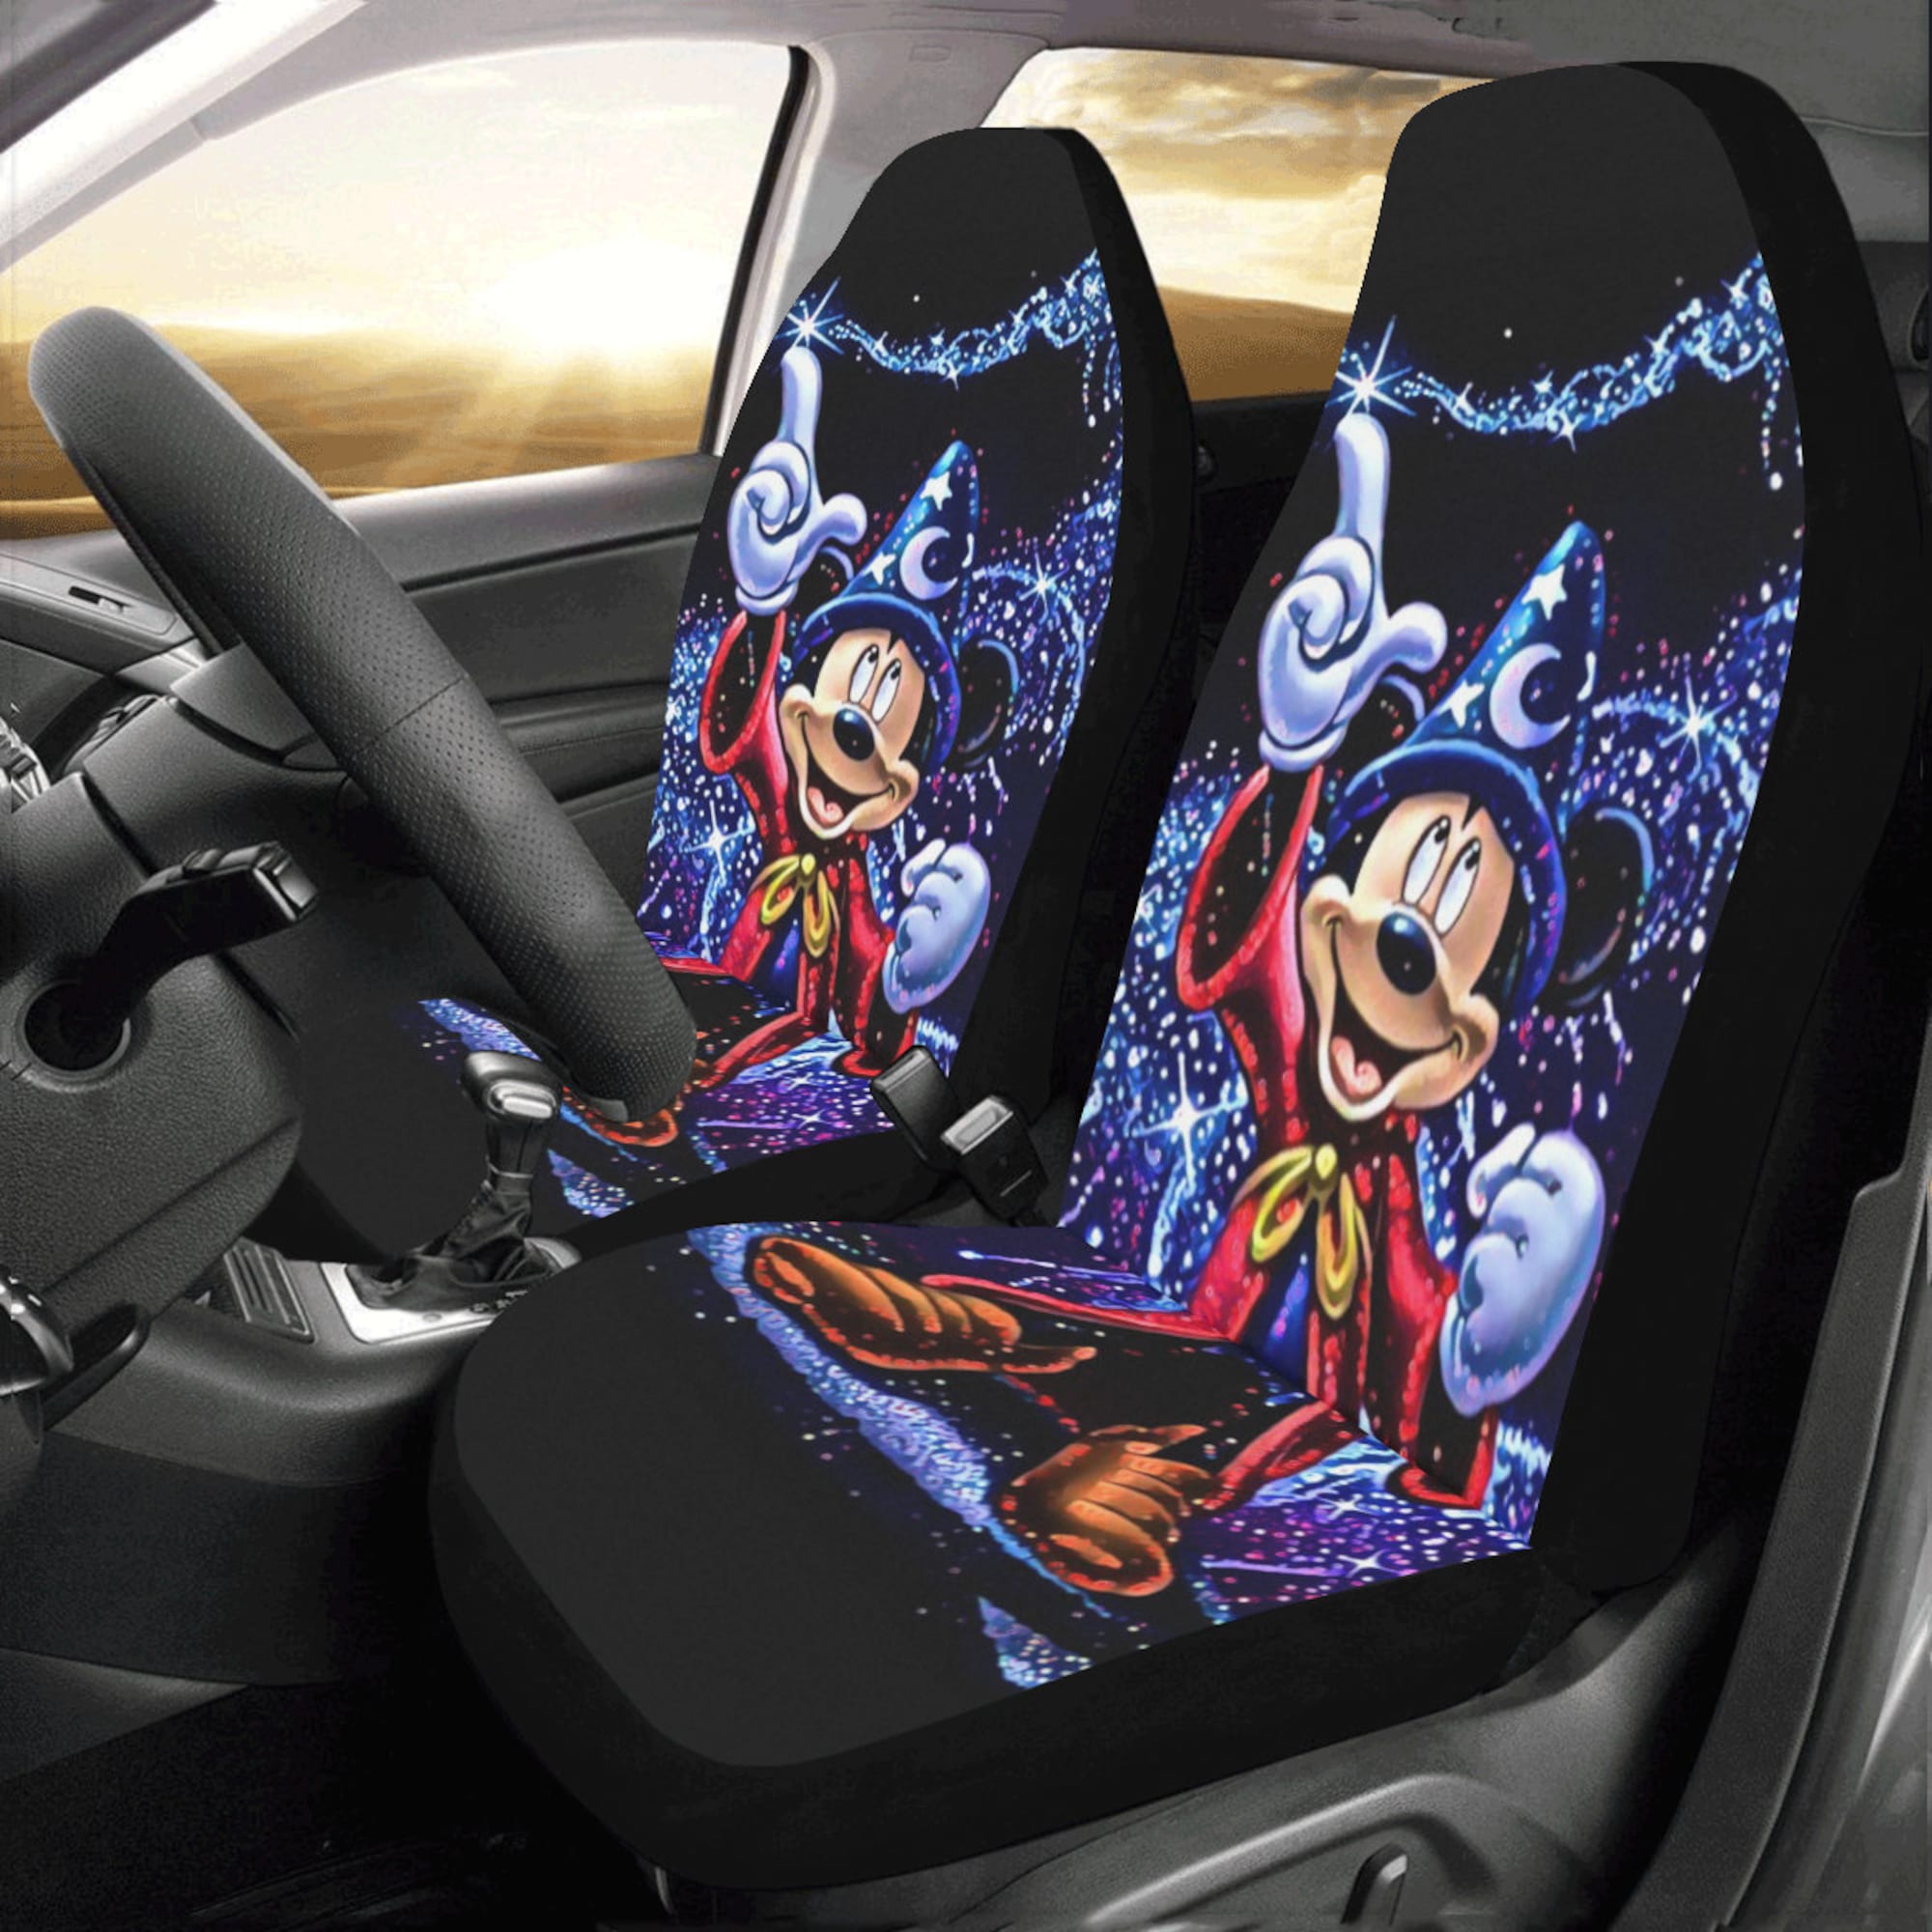 Sorcerer Mickey Car Seat Covers